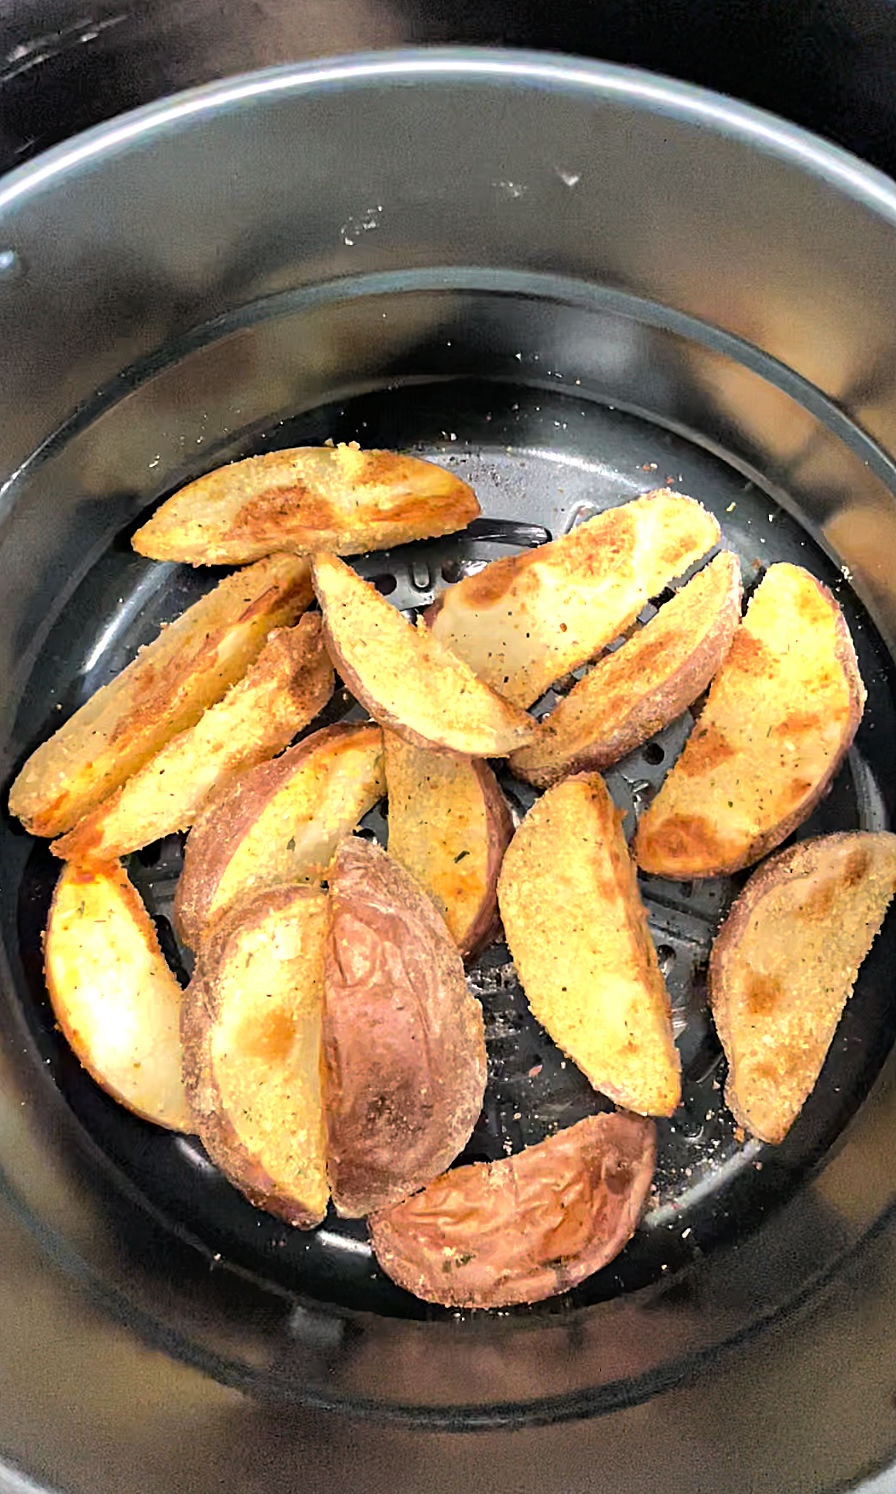 Potato Wedges finished cooking in the air fryer.